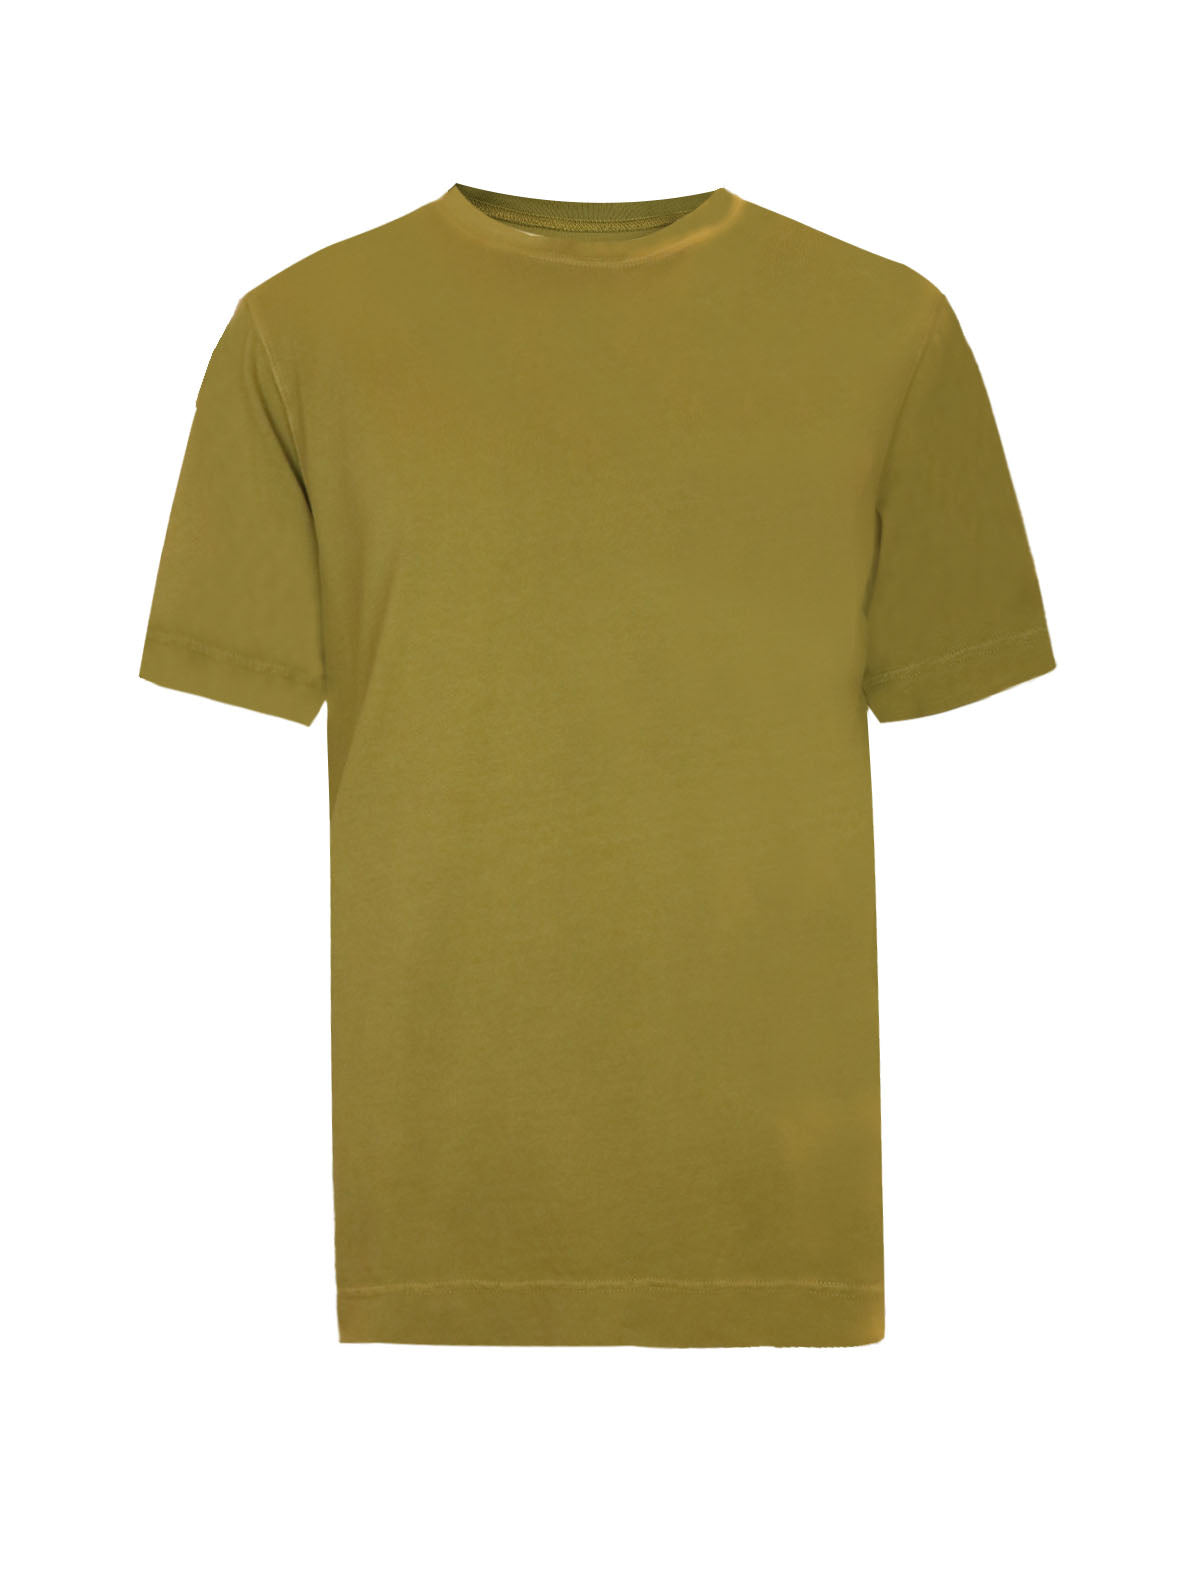 CIRCOLO 1901 Jersey T-Shirt In Olive